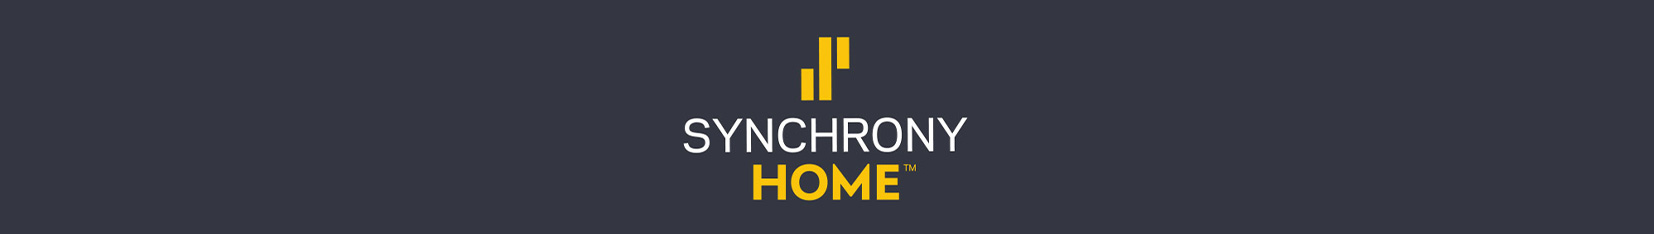 Synchrony Home - Apply Now